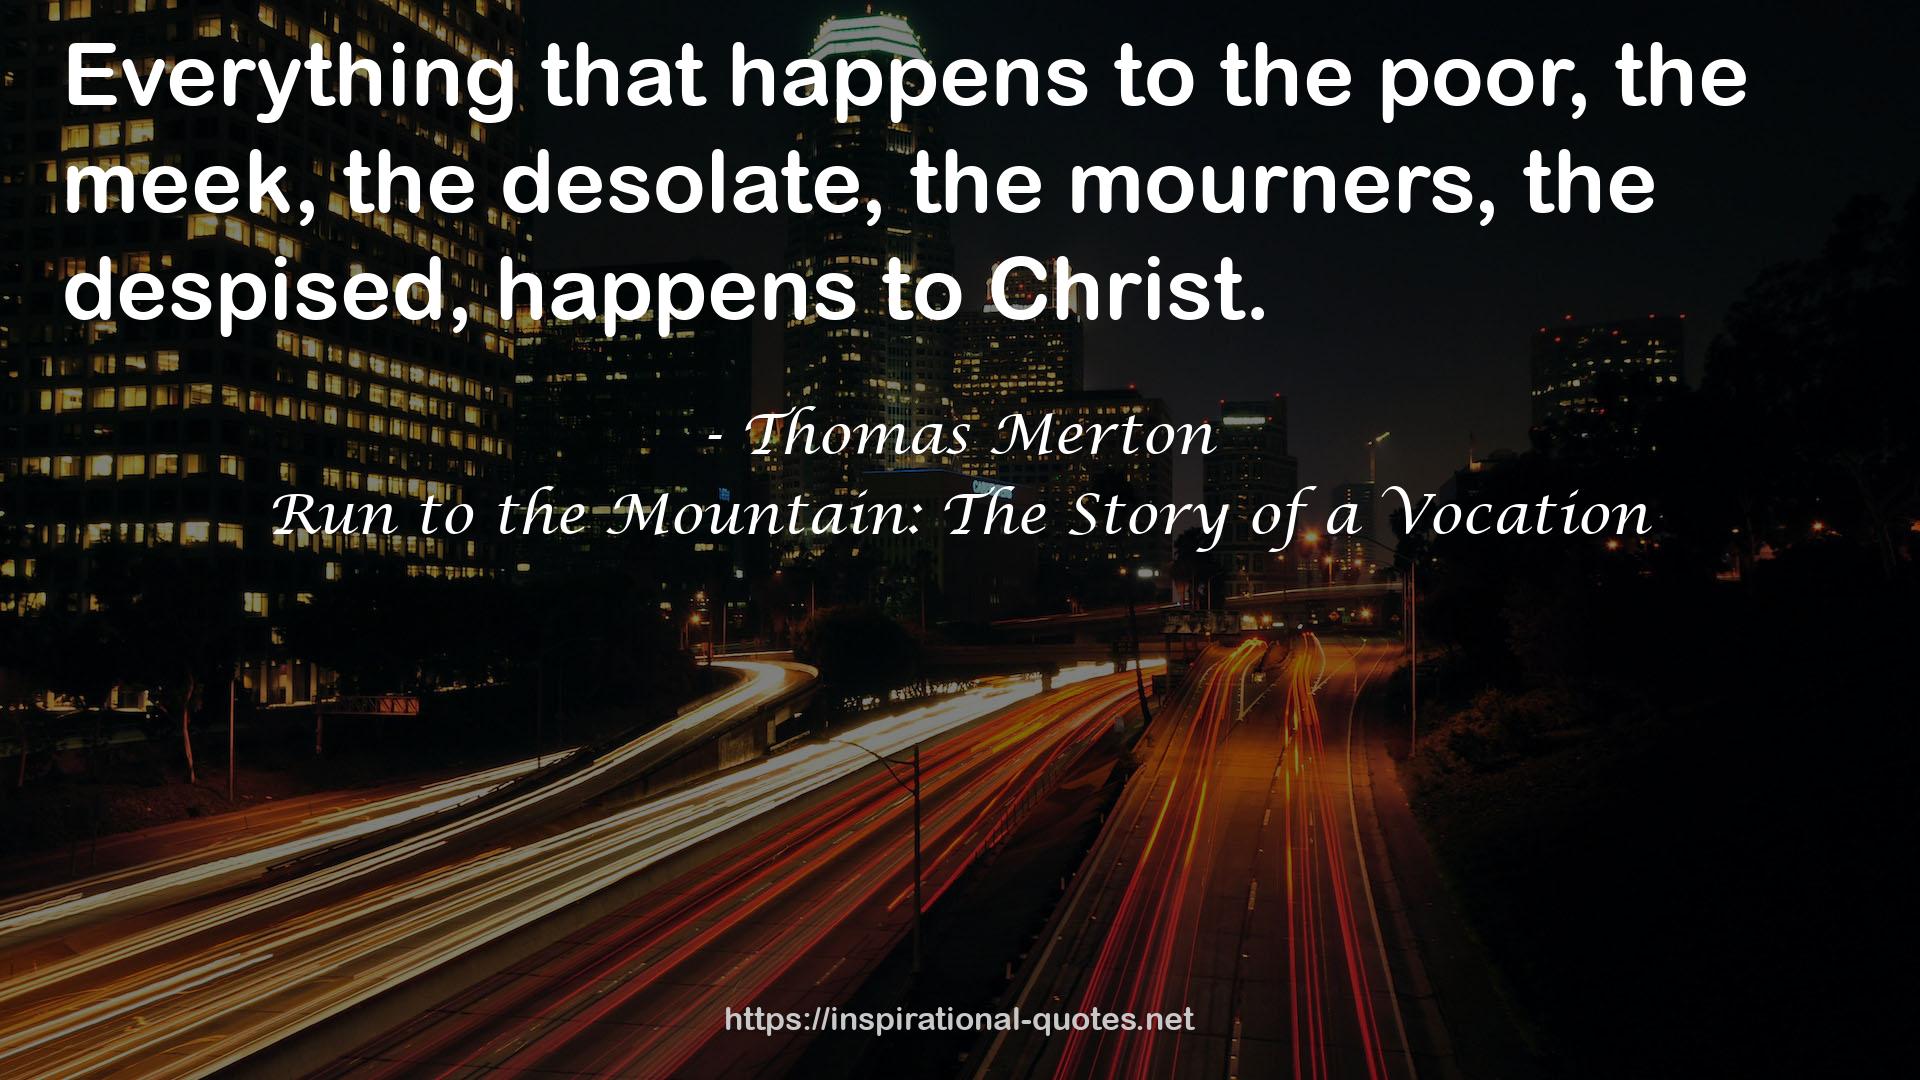 Run to the Mountain: The Story of a Vocation QUOTES